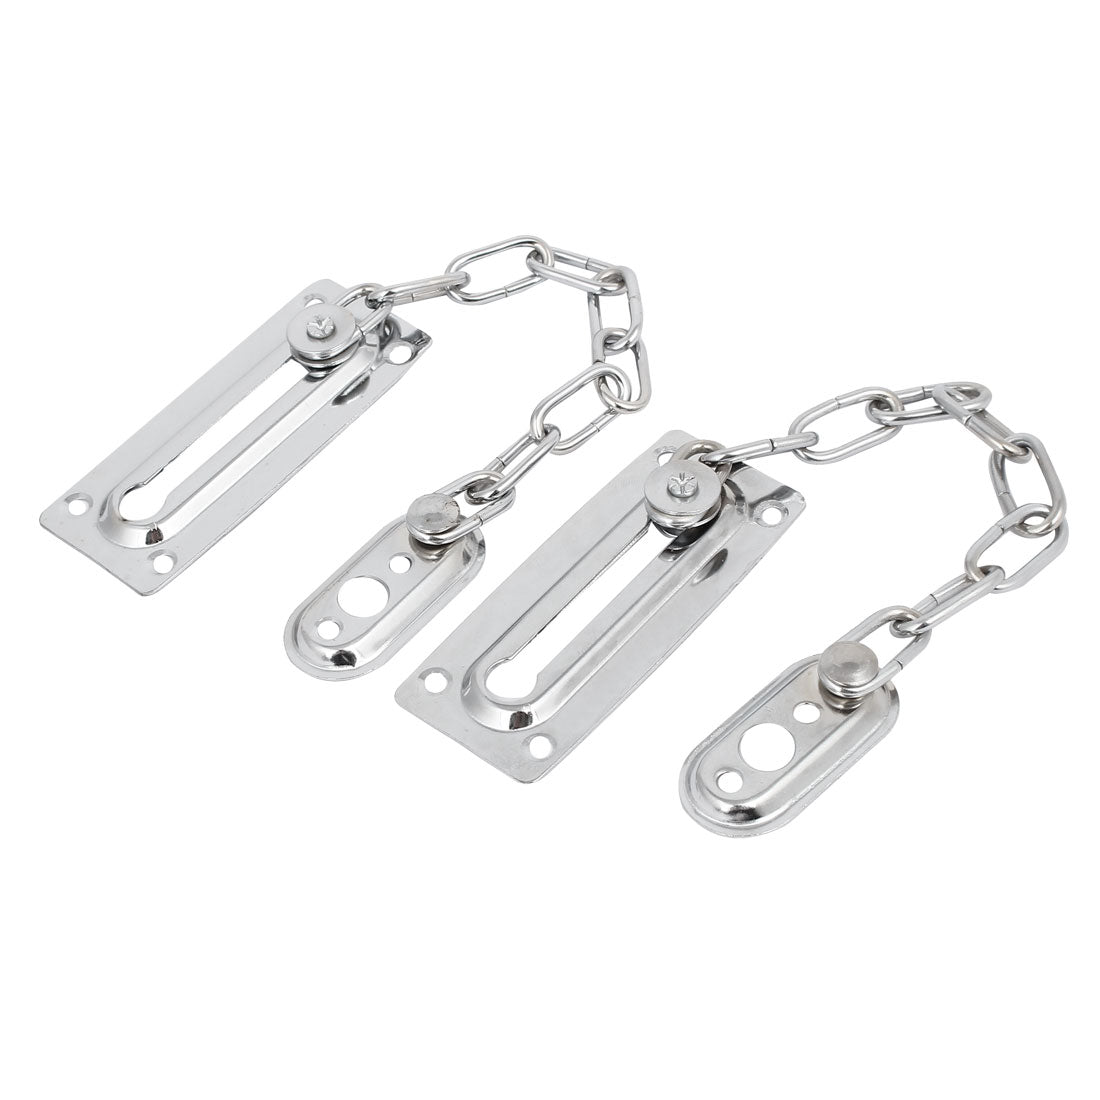 uxcell Uxcell Home Door Gate Metal Security Bolt Chain Lock Silver Tone 2pcs